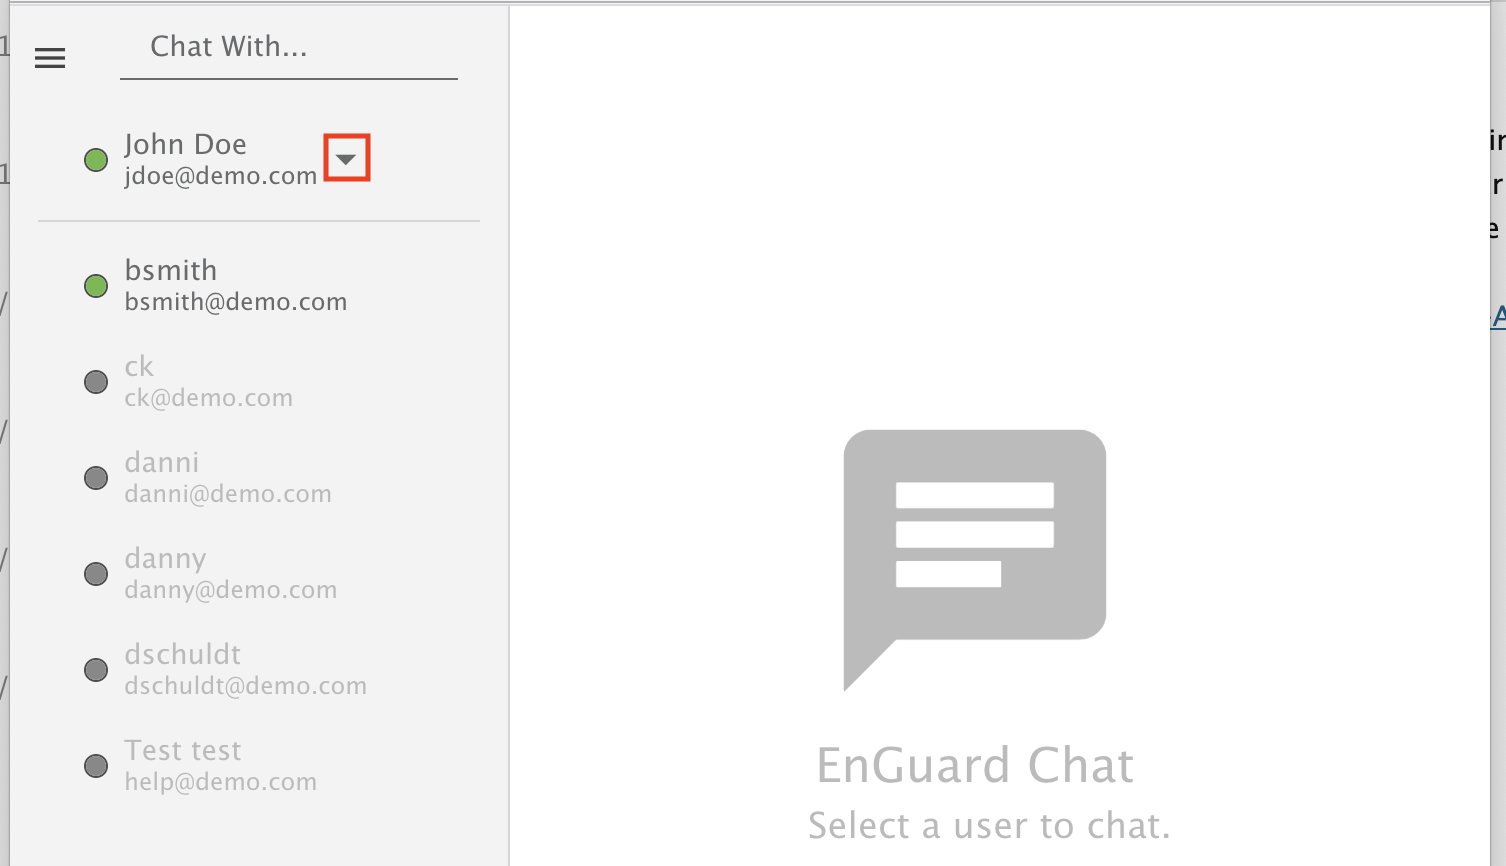 How to use EnGuard Chat in Webmail